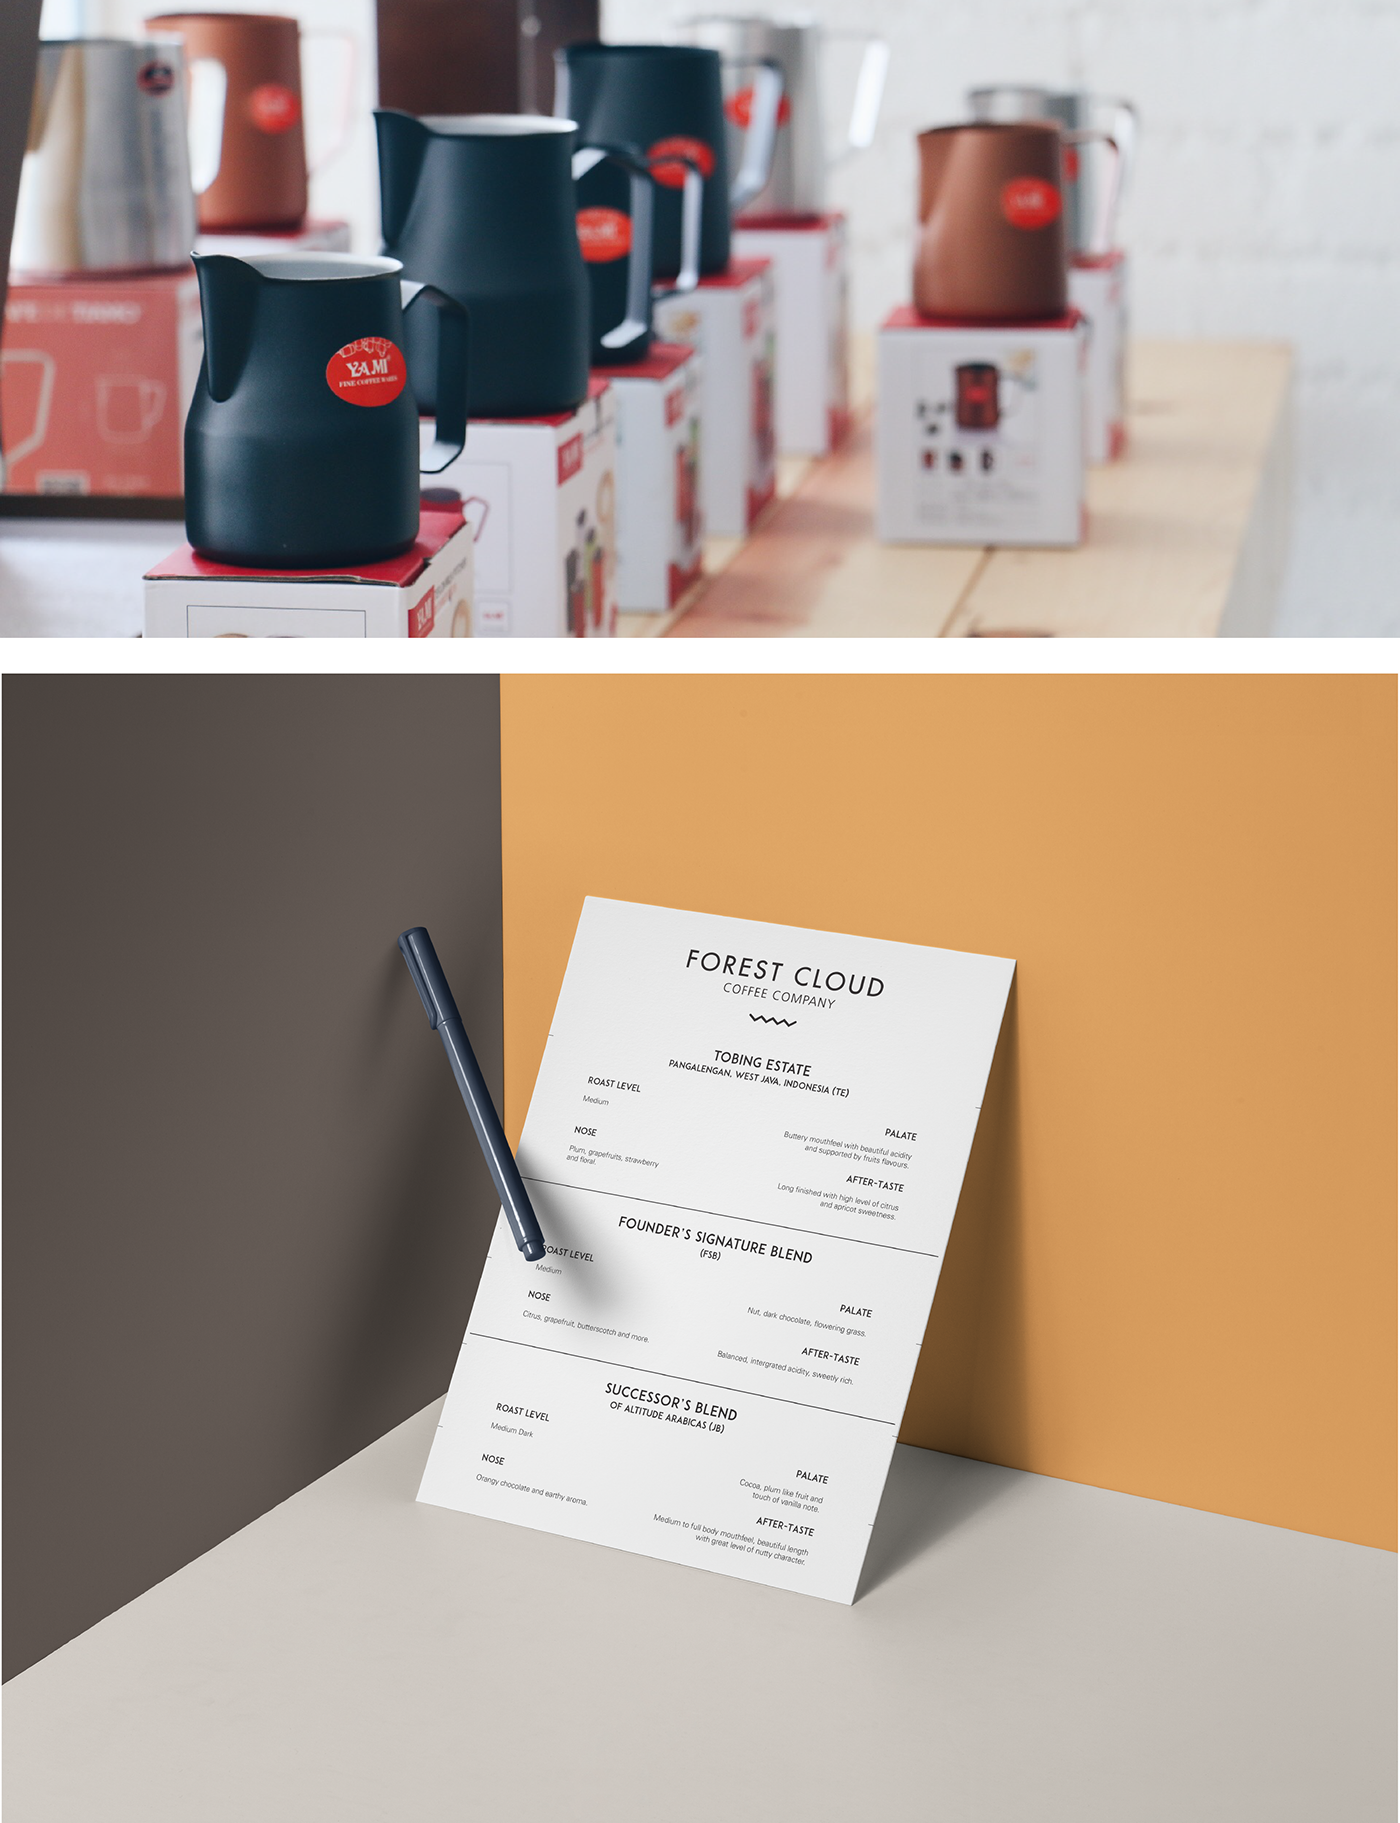 visual identity cafe branding coffee branding Photography  Icon design graphic branding  cafe poster